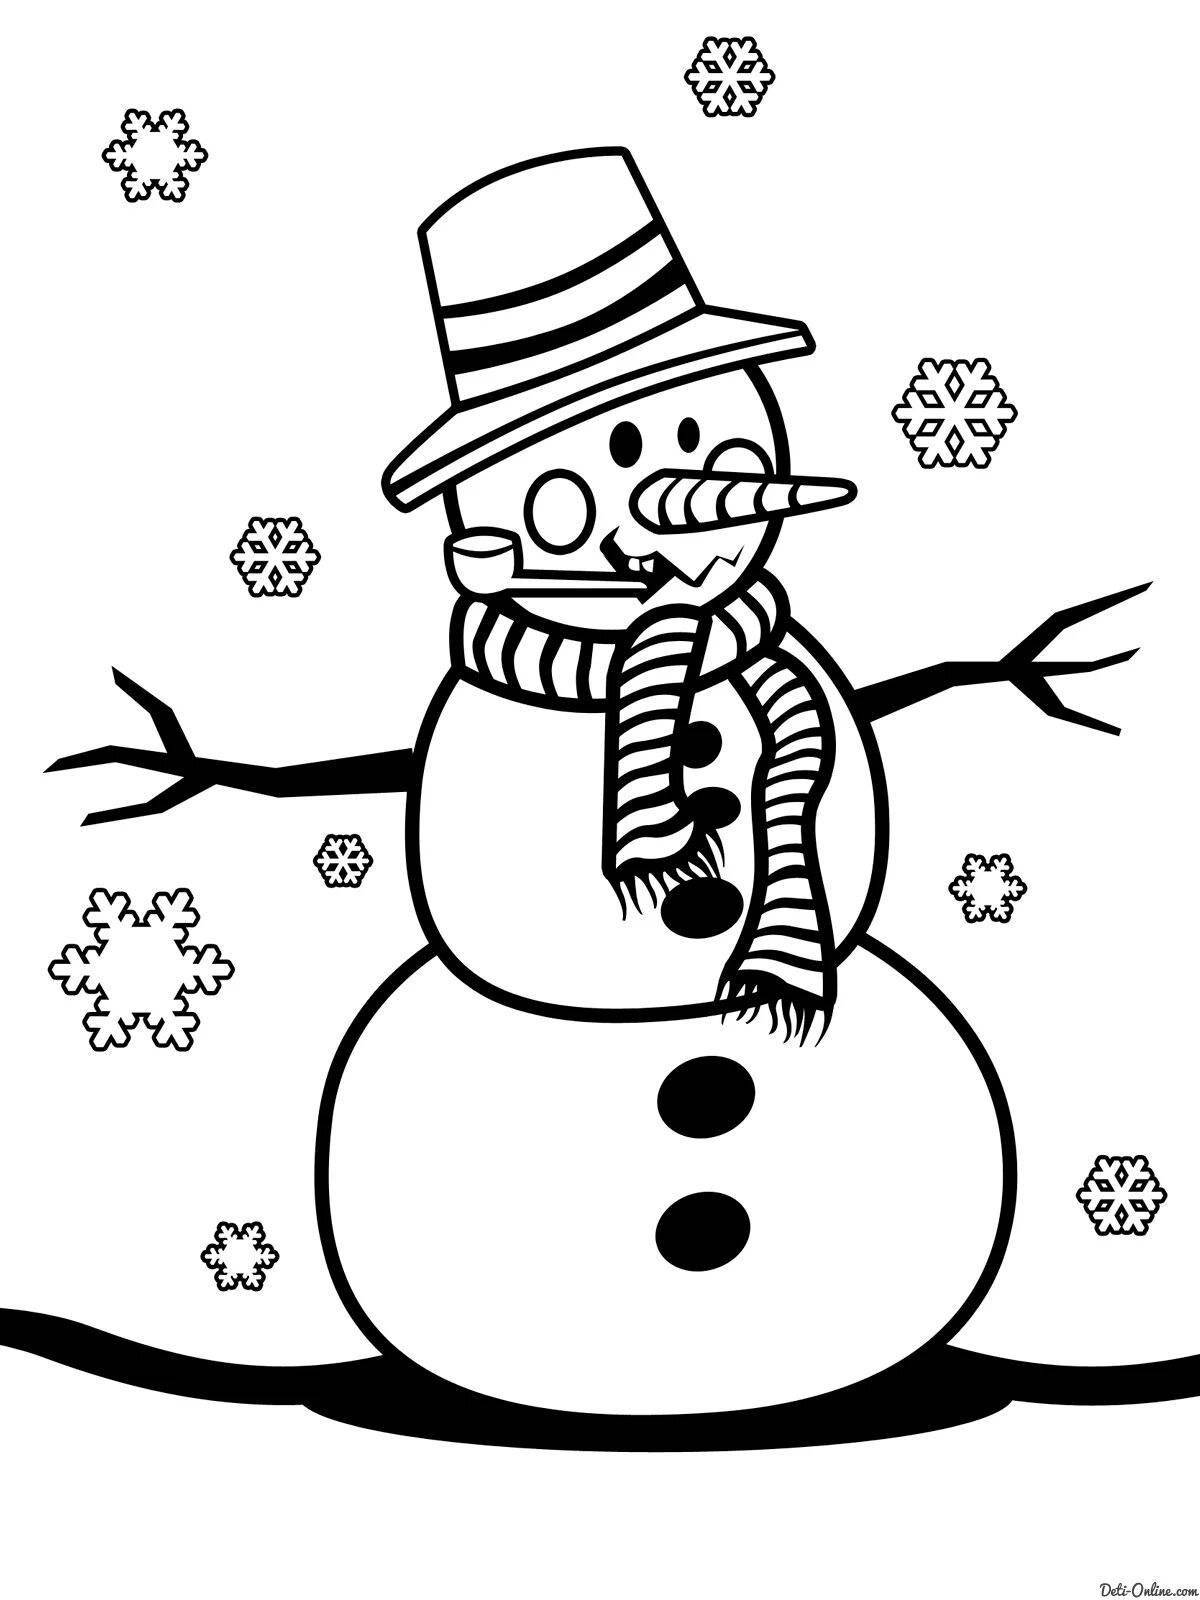 Fabulous snowman day coloring page